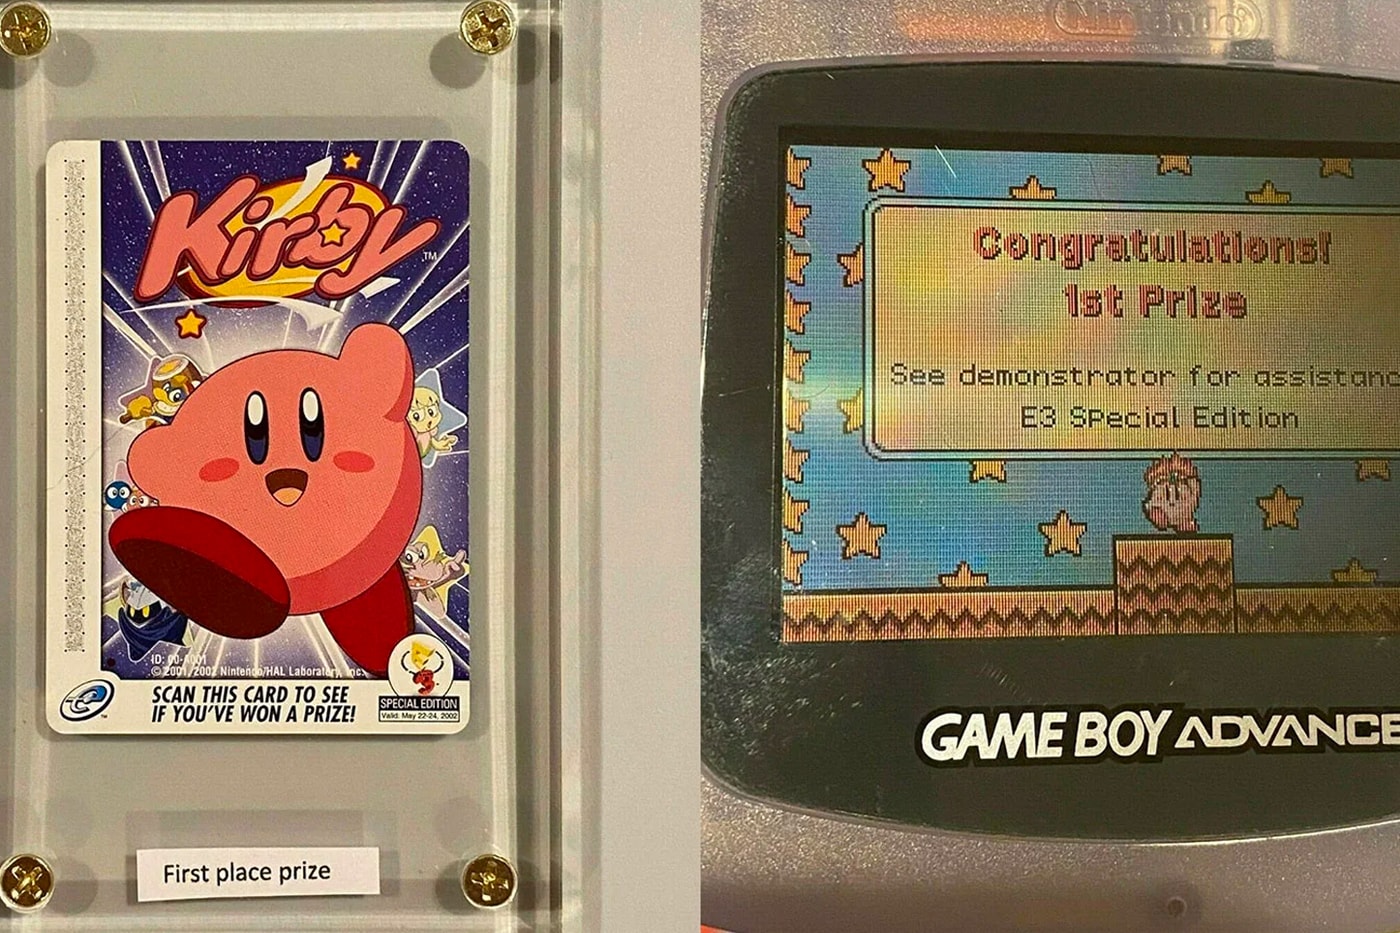 E3 2002 Nintendo Kirby e-Reader First Place Card eBay Auction psa cards tcg trading cards collectibles prize rare gaming 